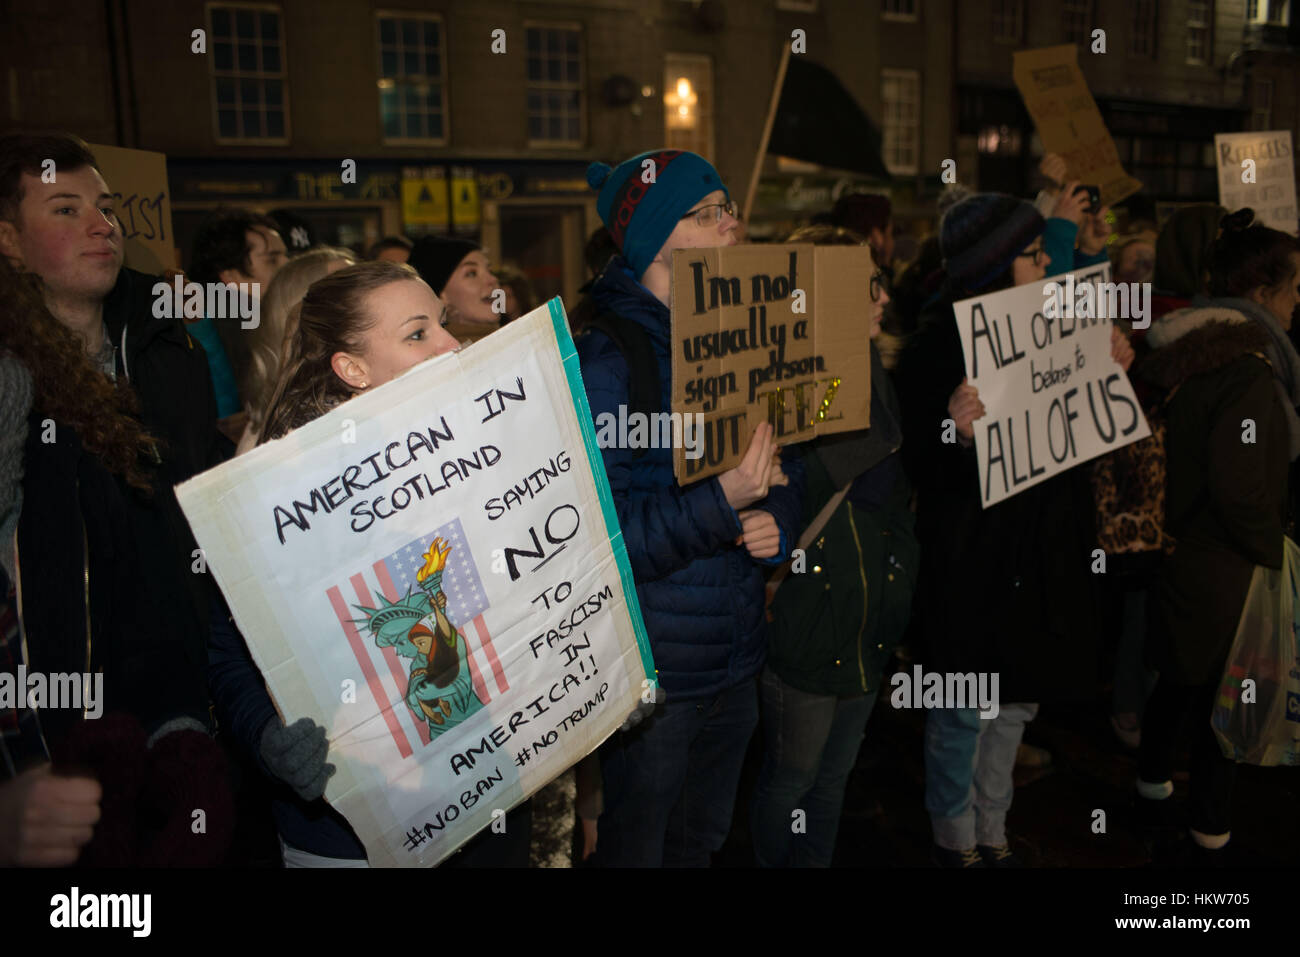 Aberdeen, UK. 30th January, 2017. Anti-Trump travel ban protest attracts hundreds of people in central Aberdeen, Scotland. Credit: Paul Glendell/Alamy Live News Stock Photo